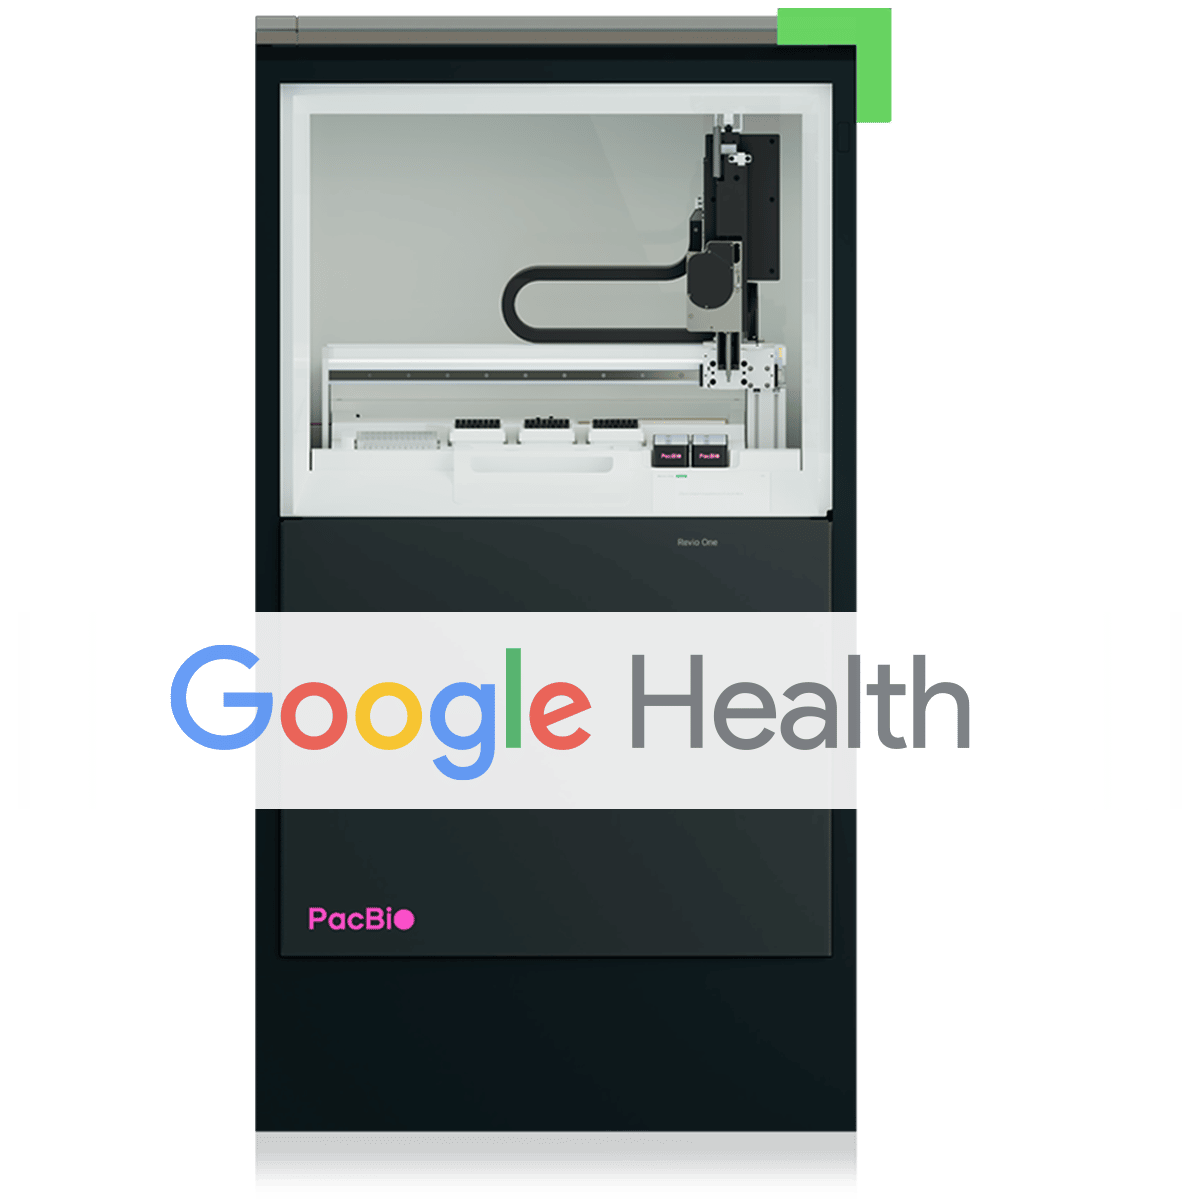 Image of Revio system with Google Health logo in front